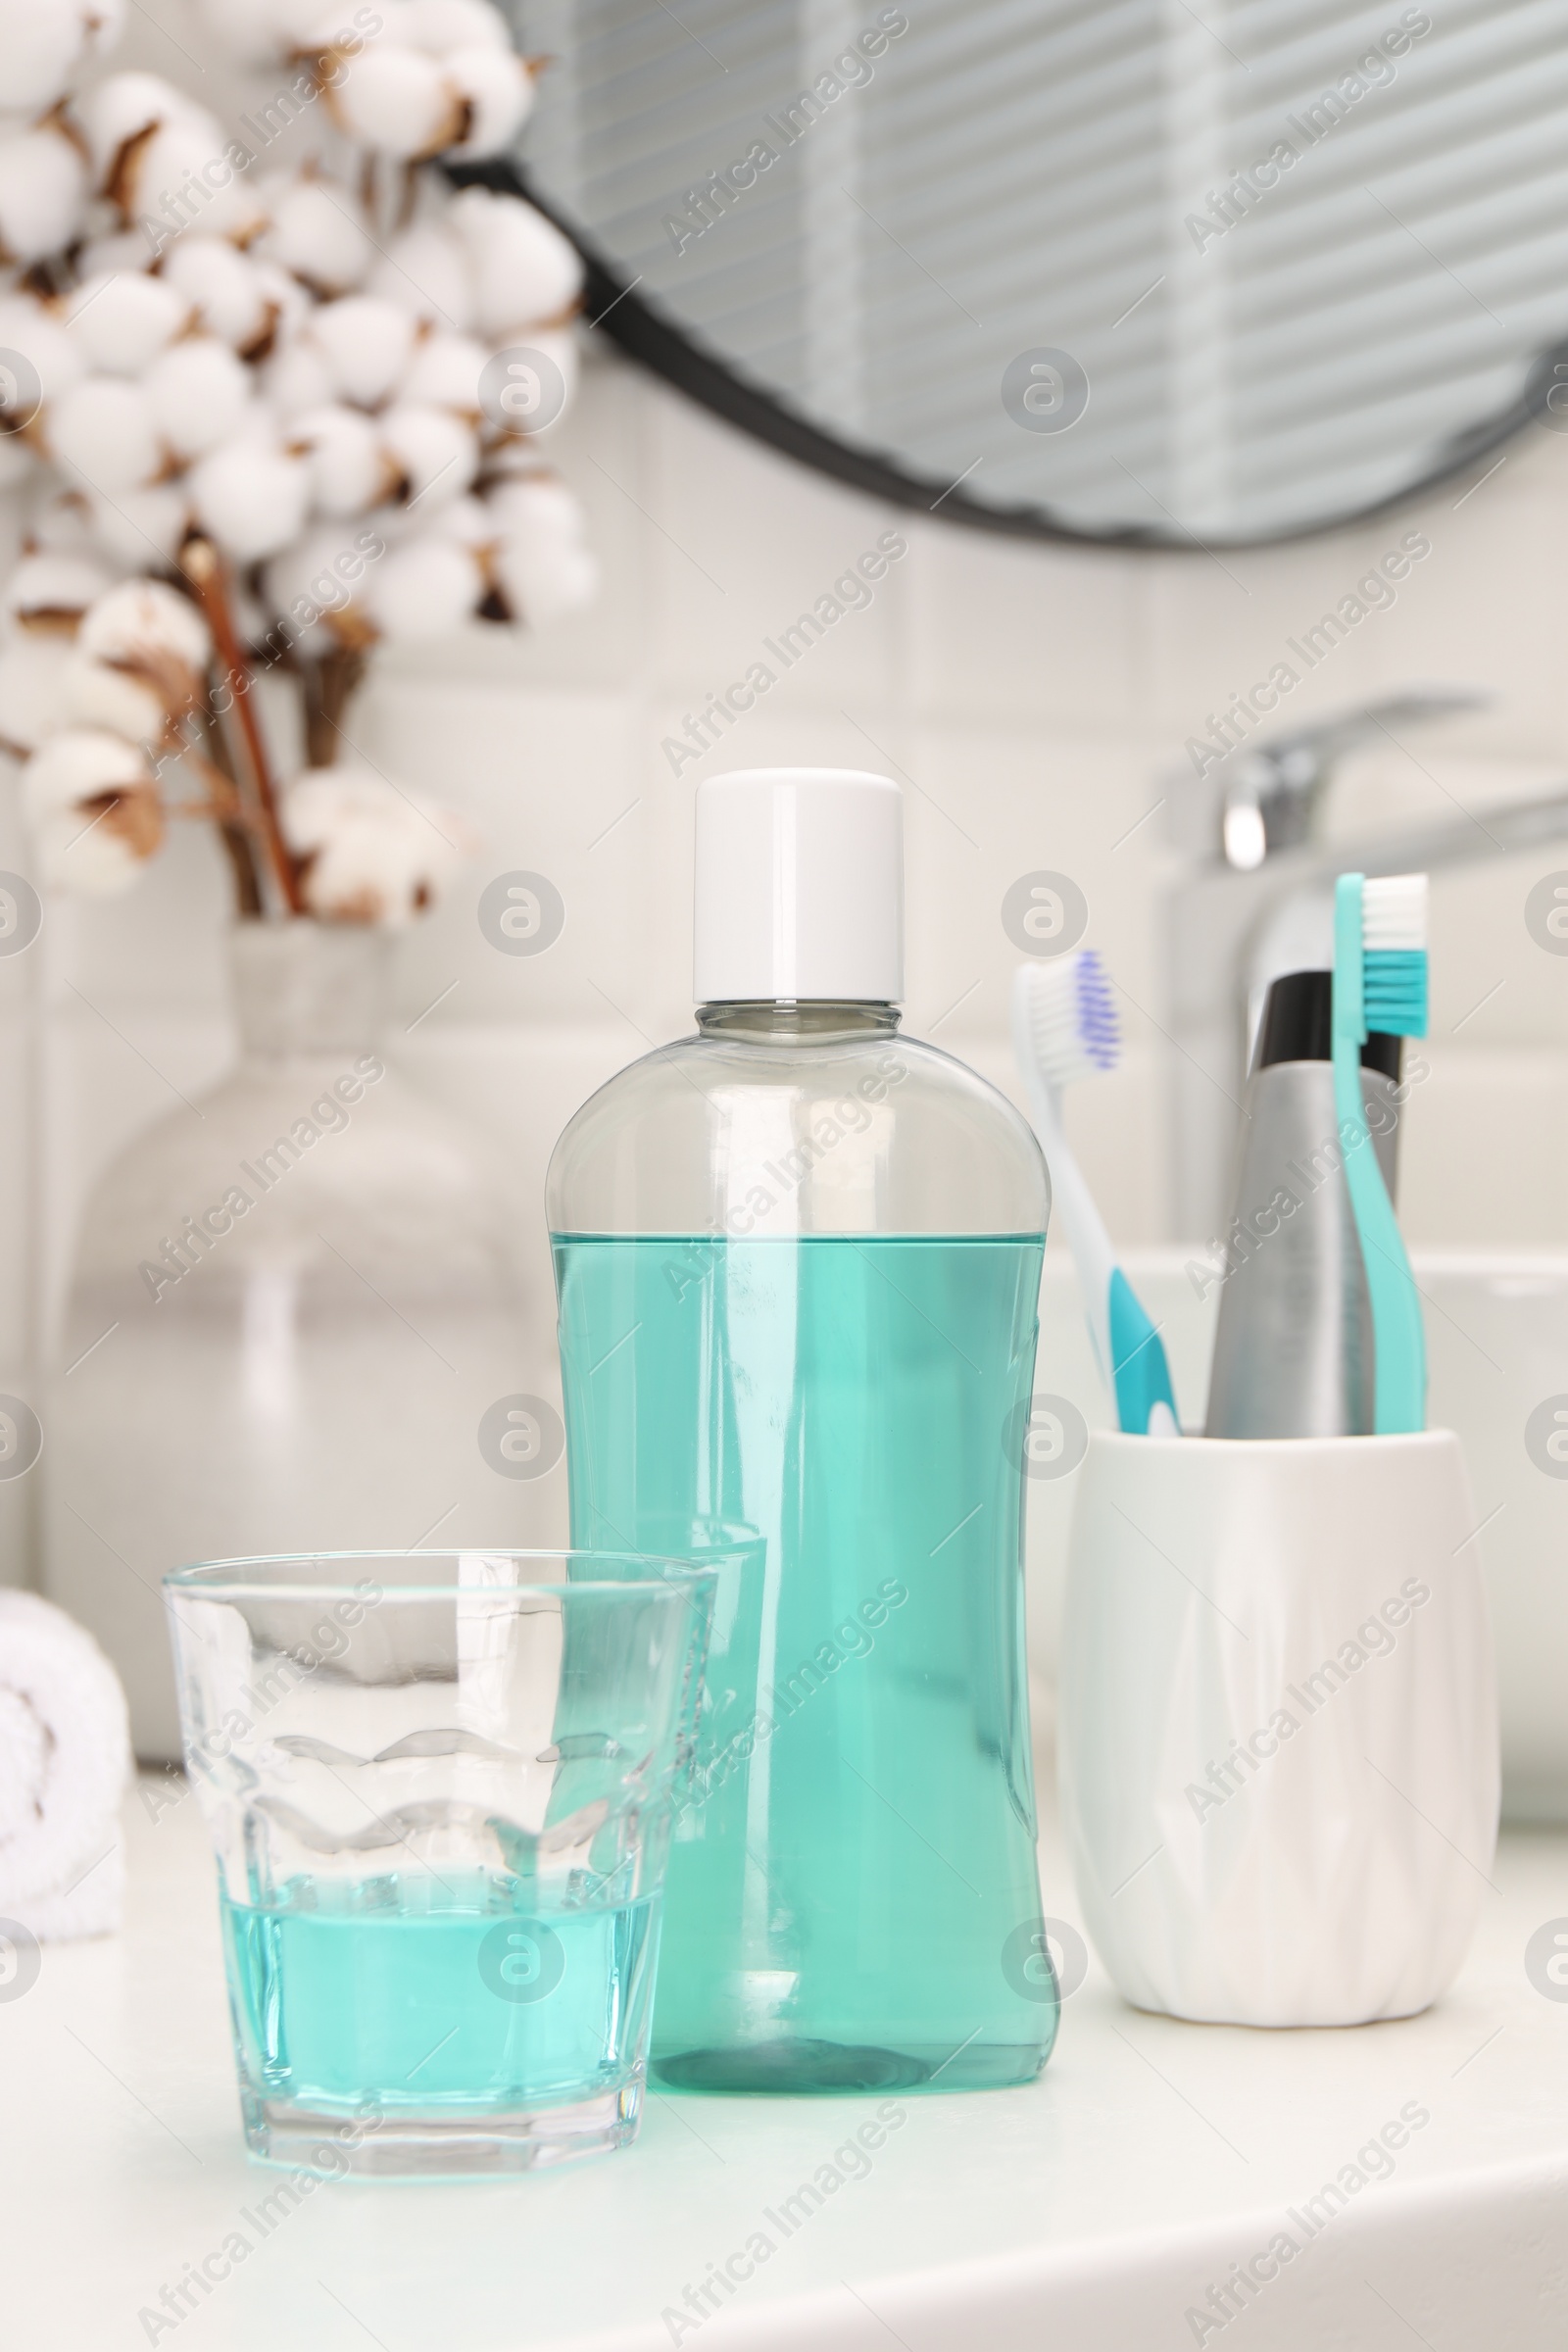 Photo of Bottle of mouthwash and glass on white table in bathroom